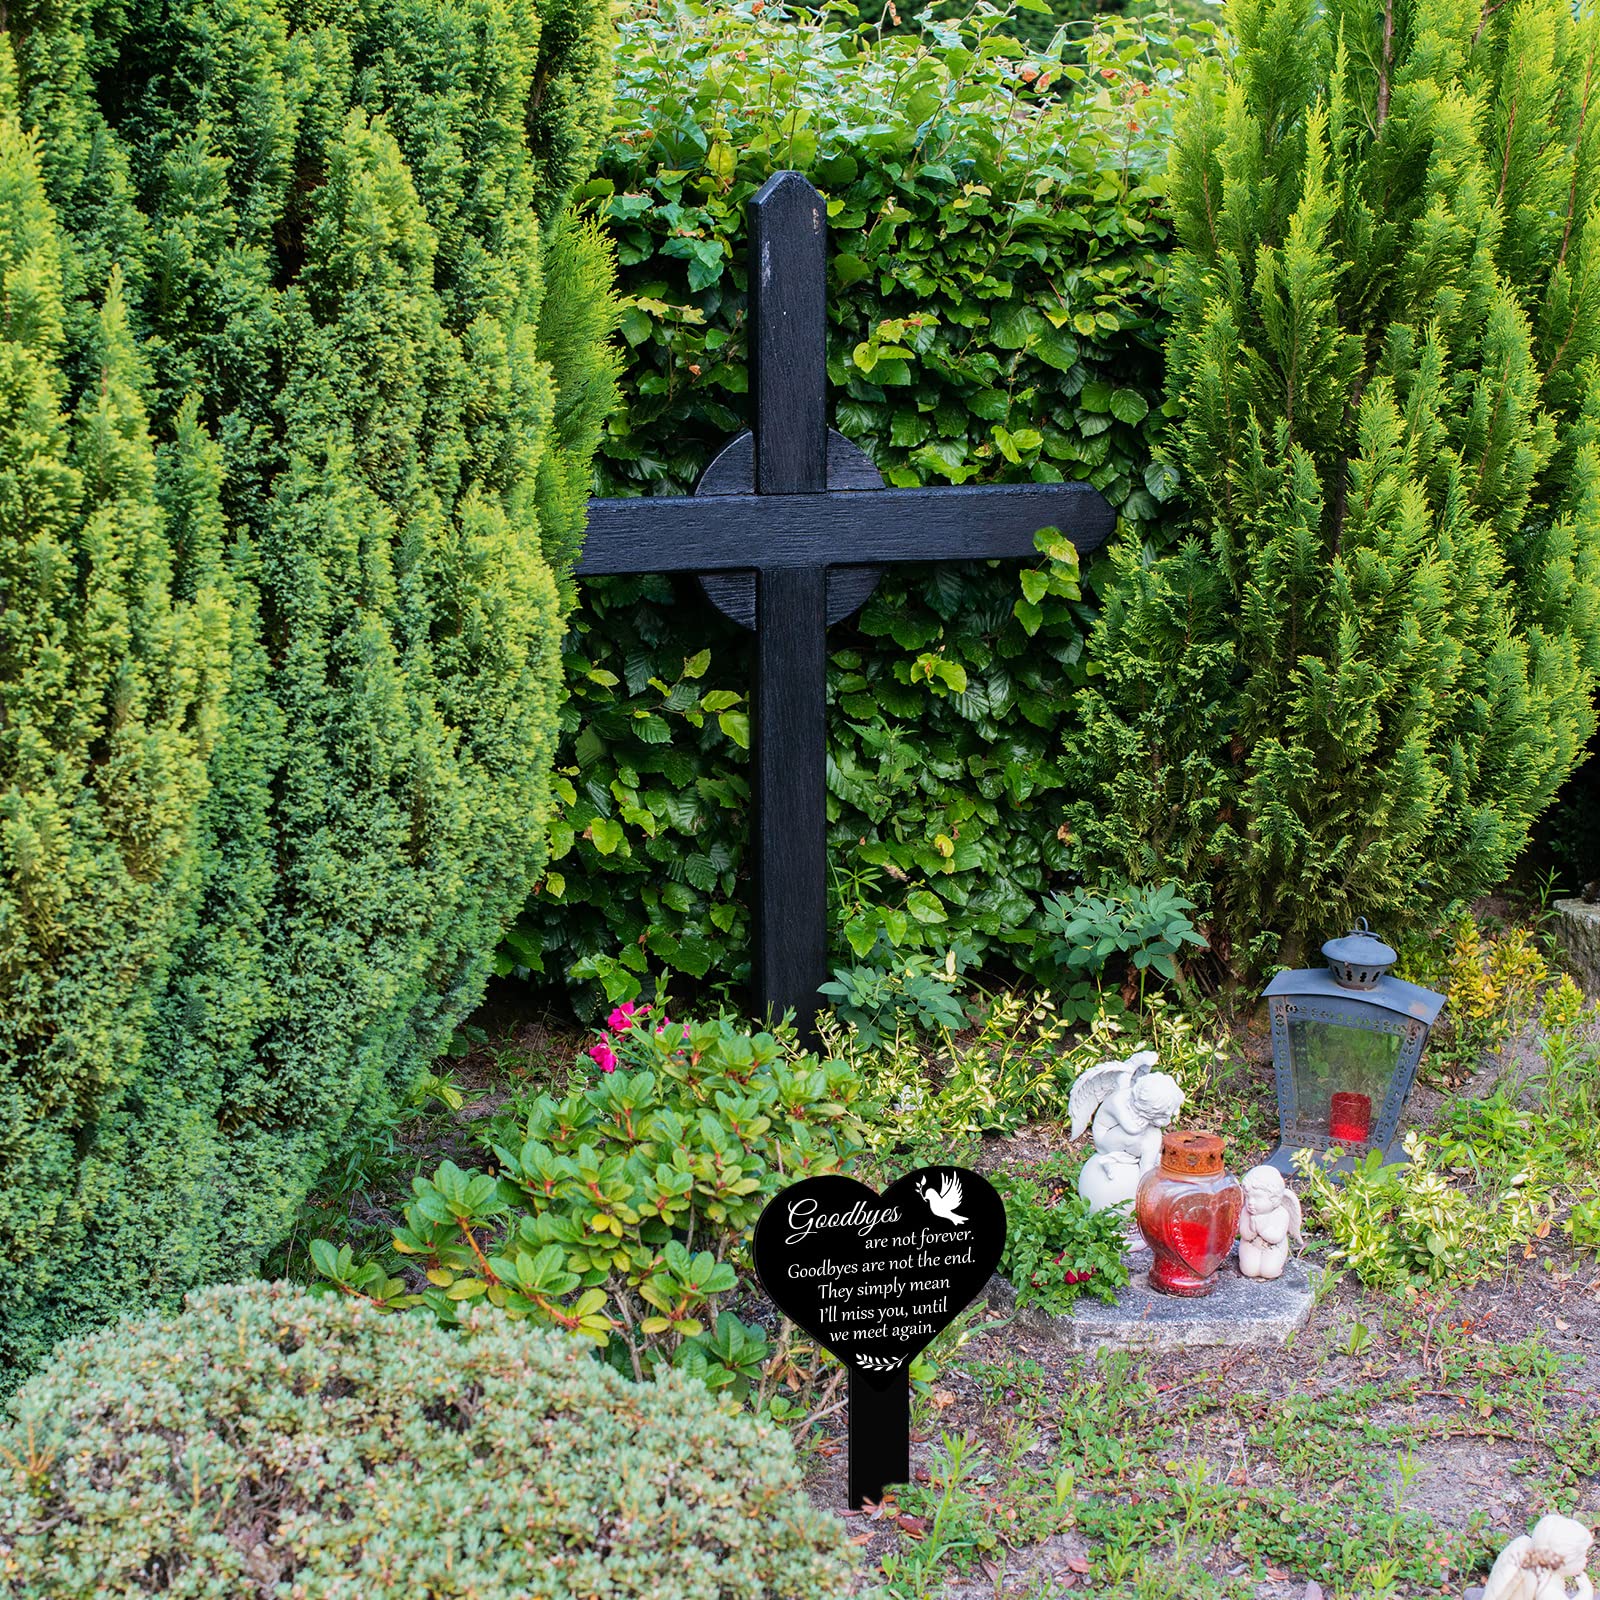 Roowest Heart Memorial Remembrance Plaque Stake Acrylic Grave Marker for Cemetery Black Memorial Garden Stake Sympathy Grave Stake for Outdoors Yard Grave Waterproof Cemetery Decoration, Heart Shape